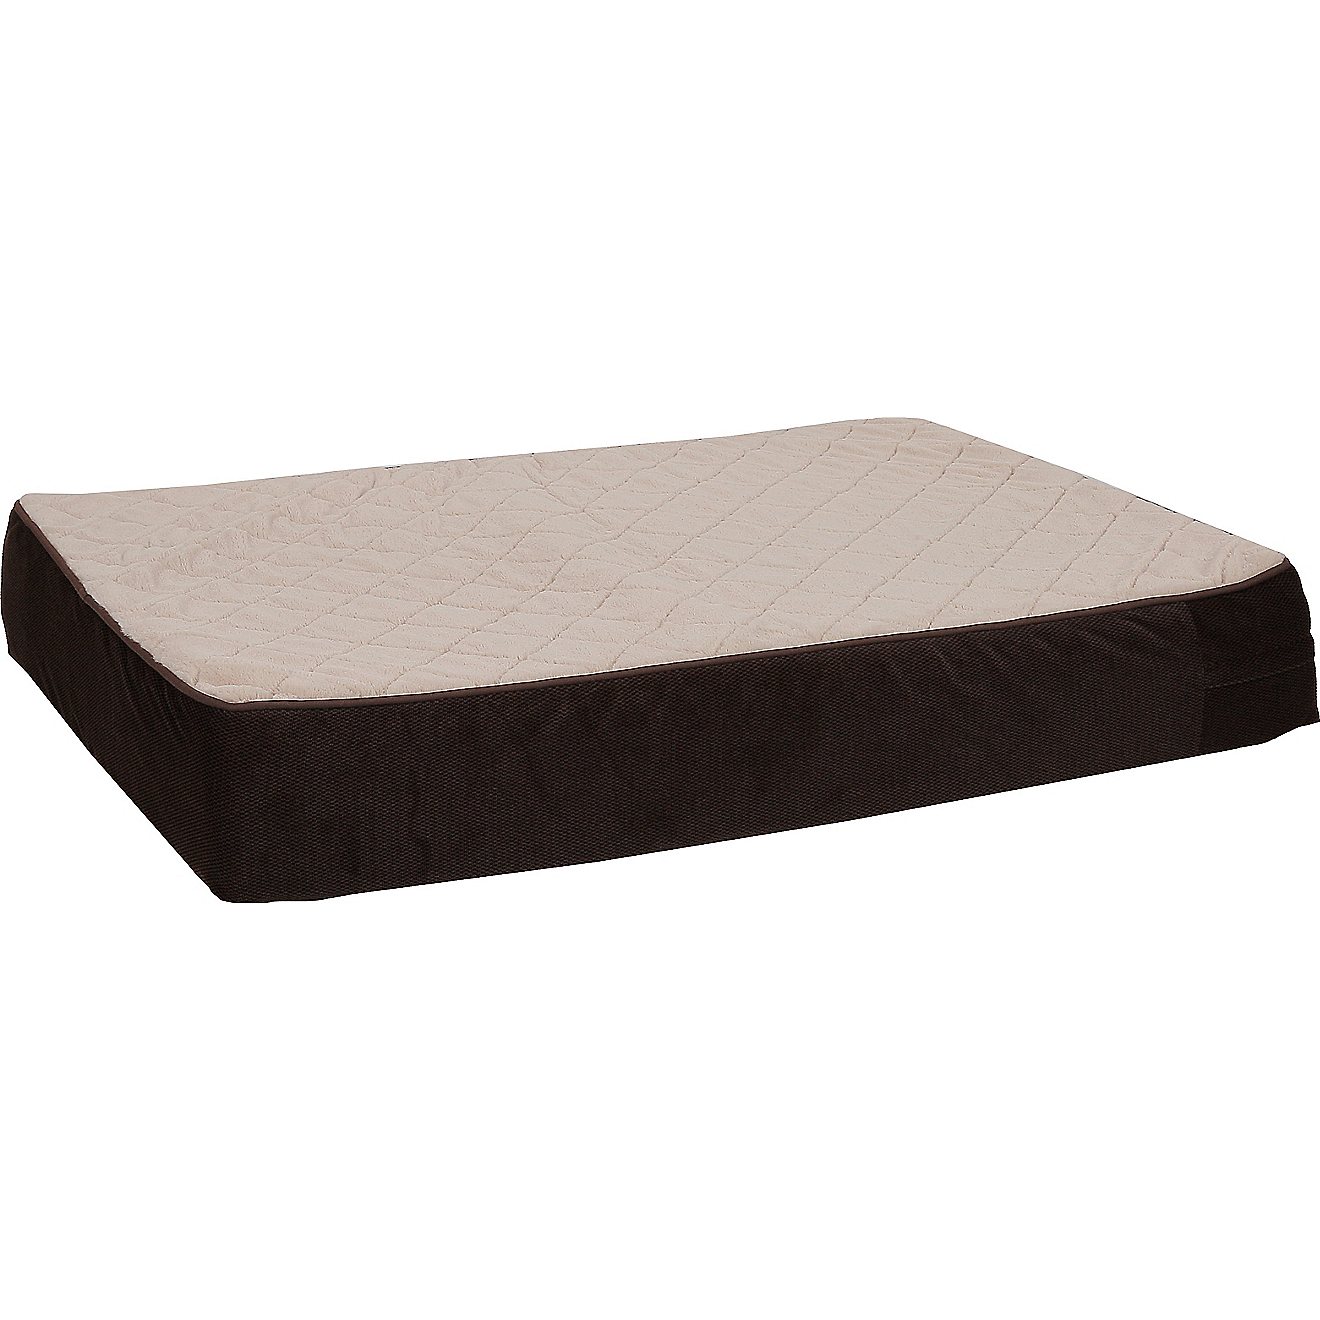 Dallas Manufacturing Company 30 in x 40 in x 6 in Orthopedic Pet Bed                                                             - view number 2